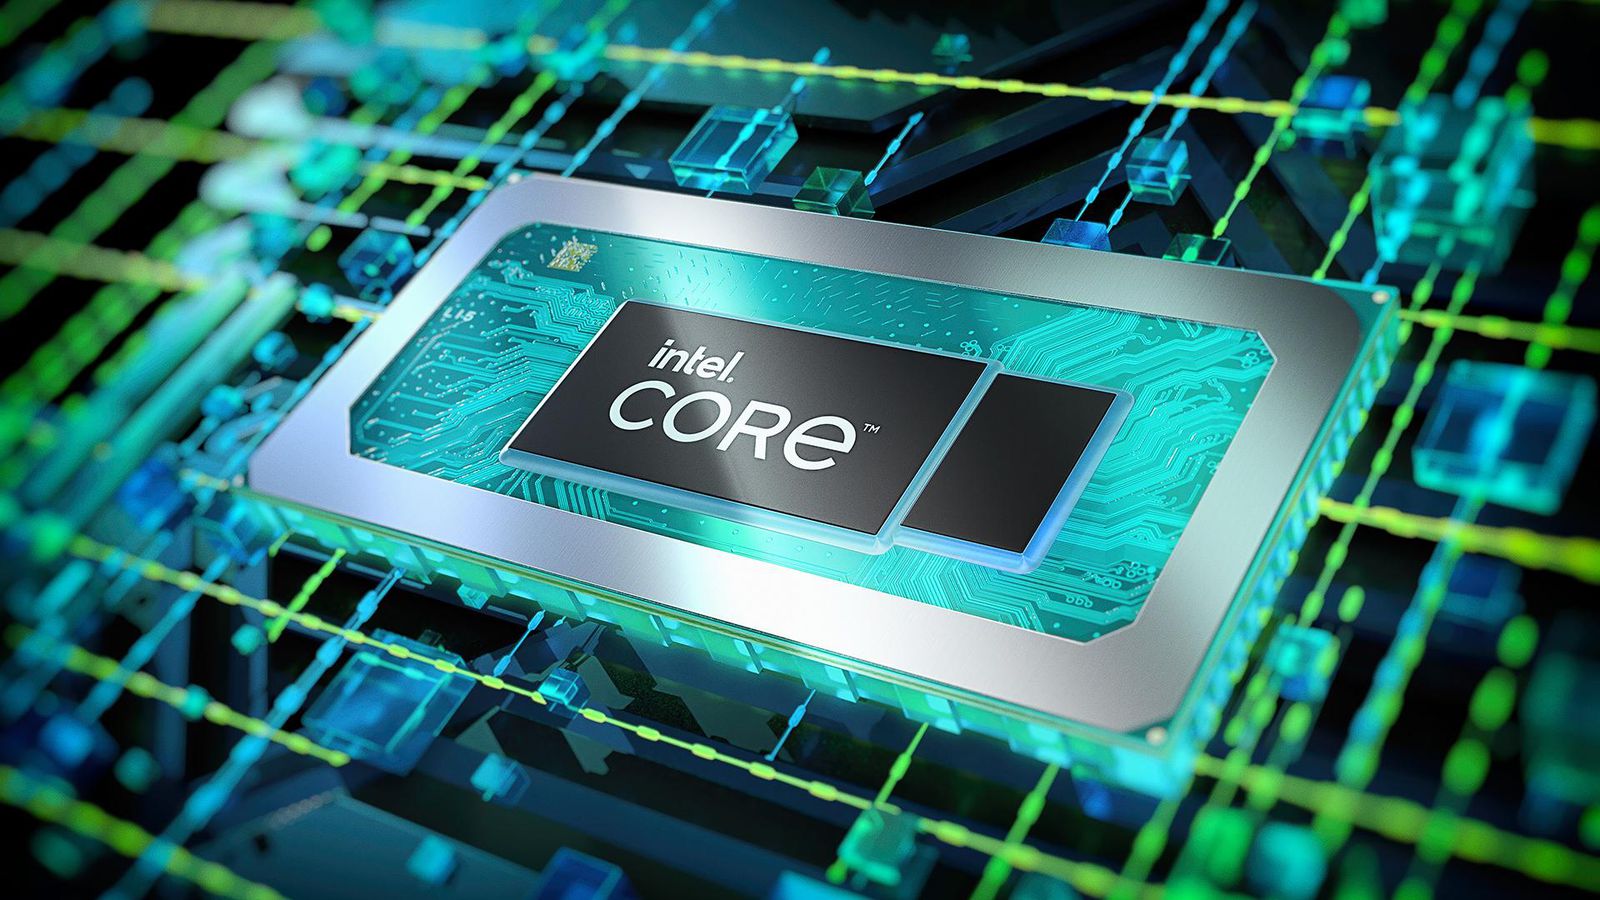 Intel Says New Core i9 Processor for Laptops is Faster Than